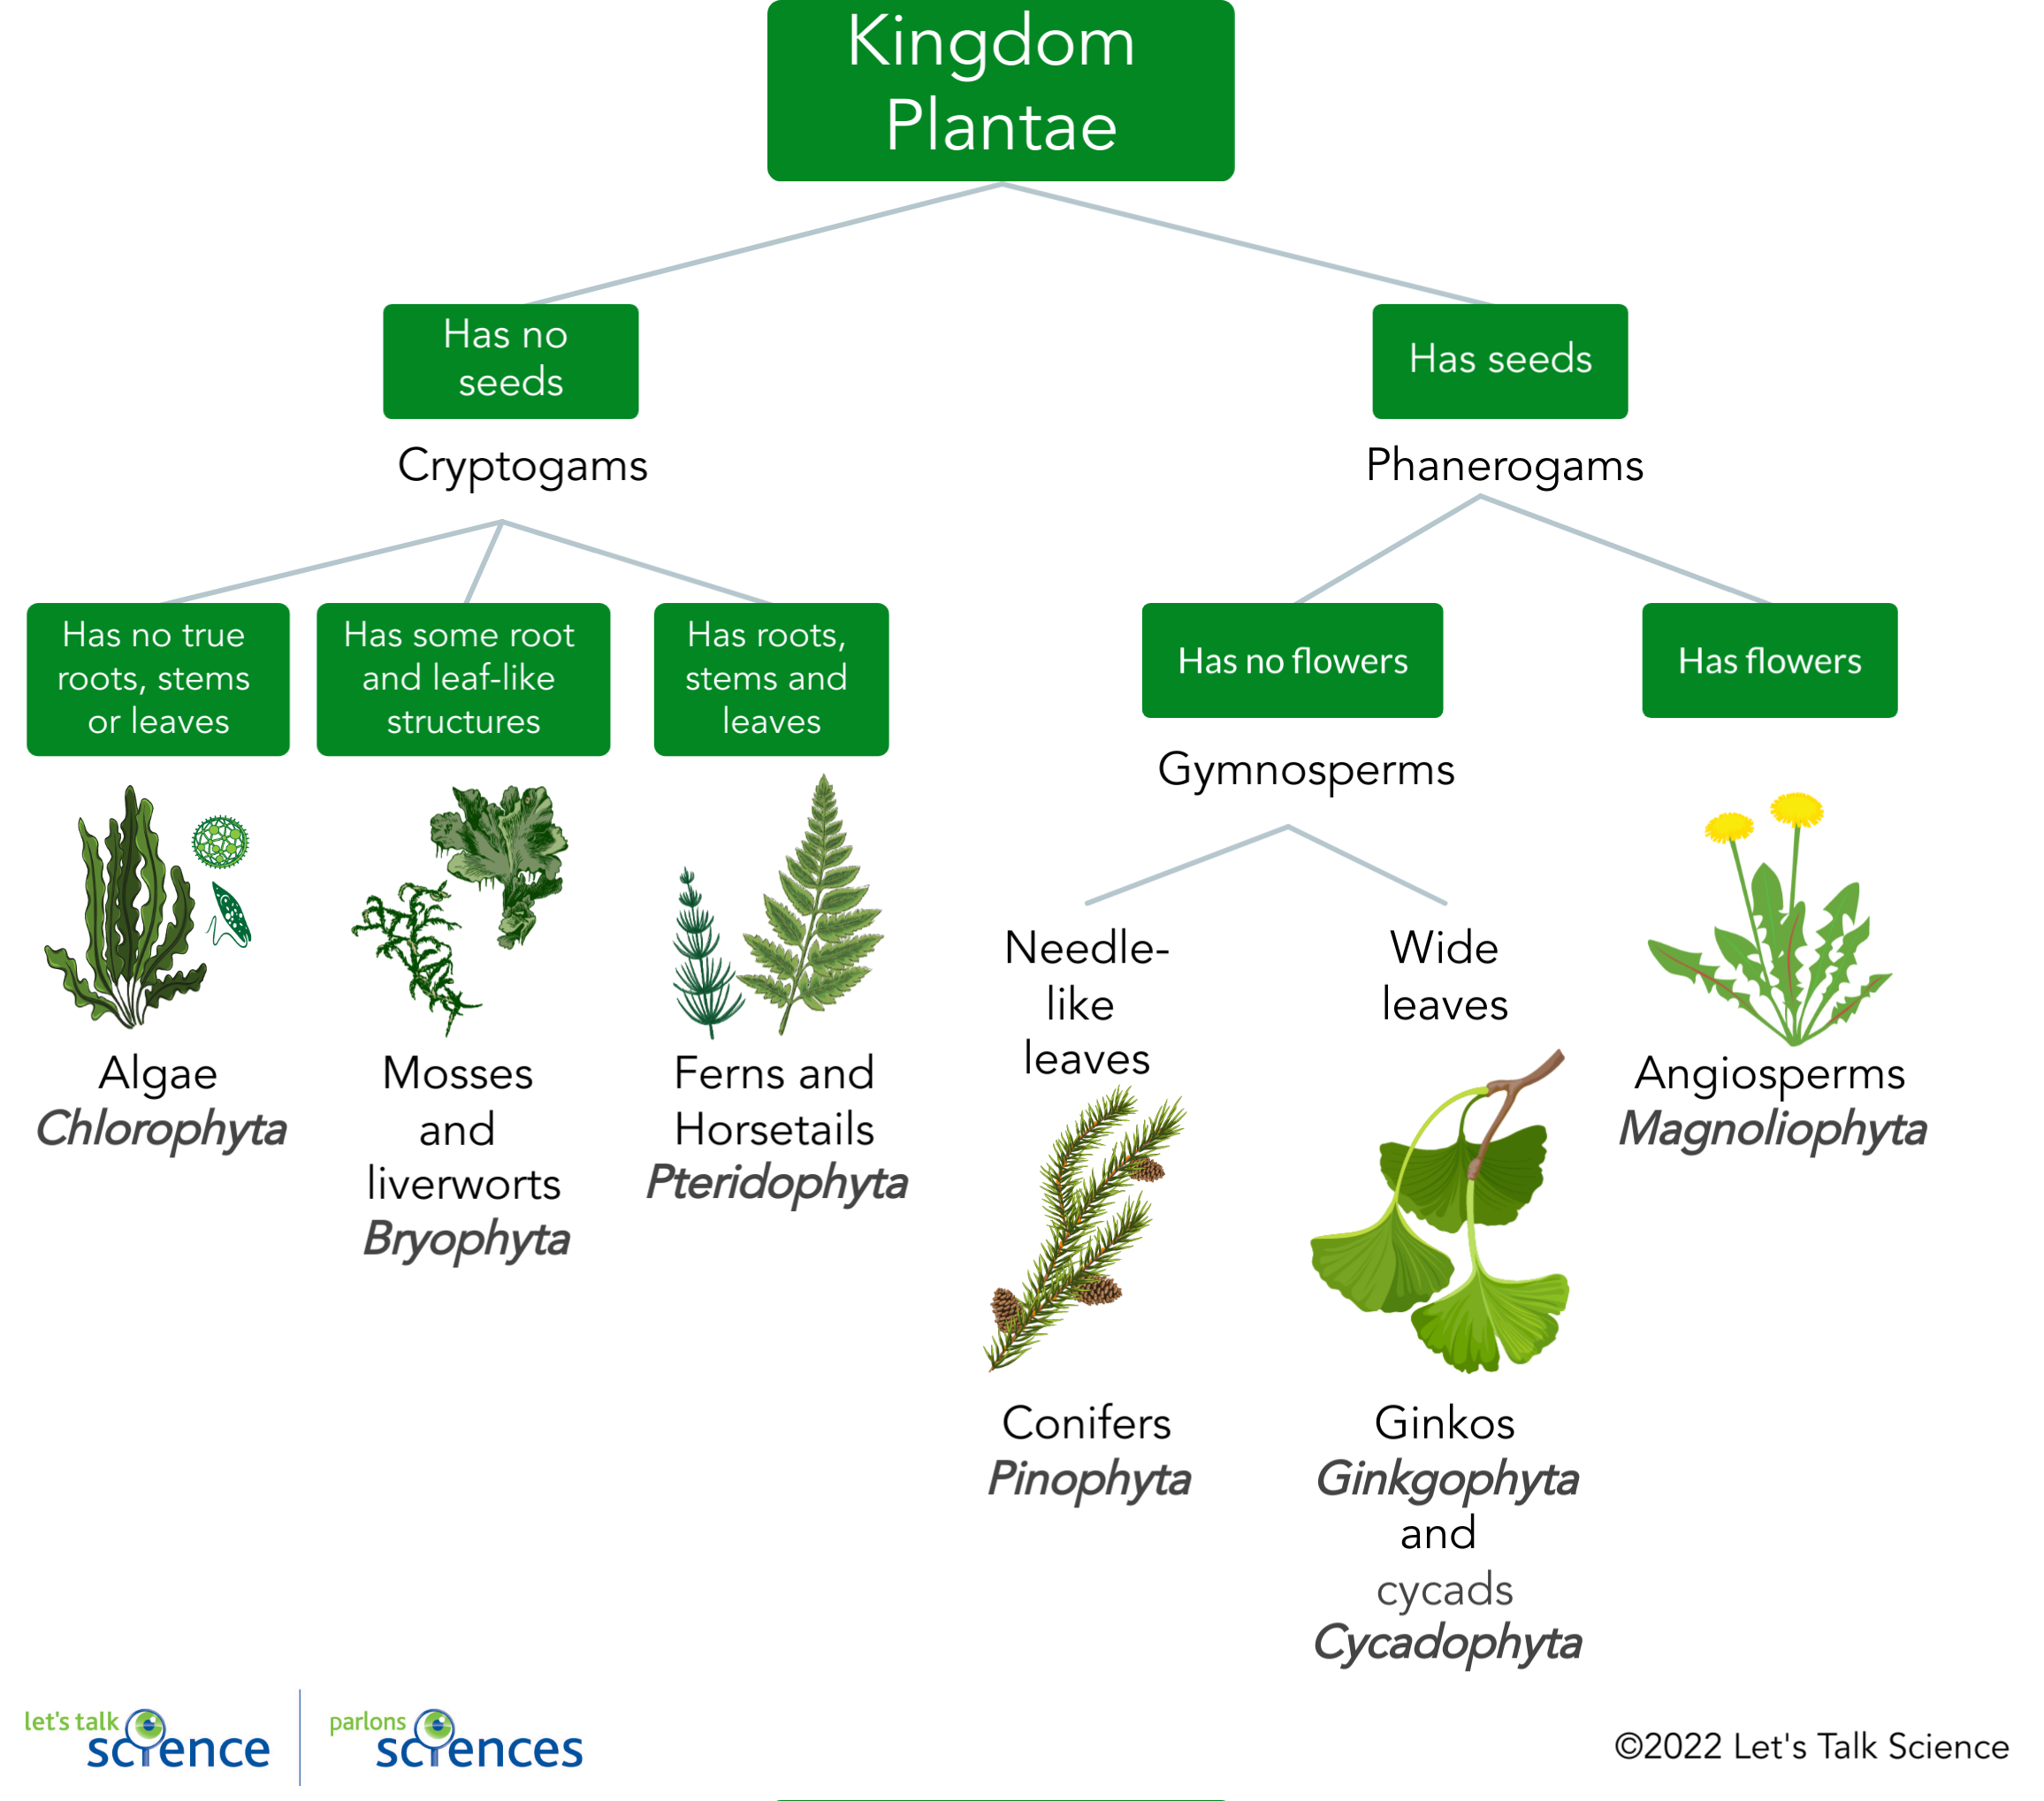 Shown is a colour flowchart of divisions within the plant kingdom with examples from each.